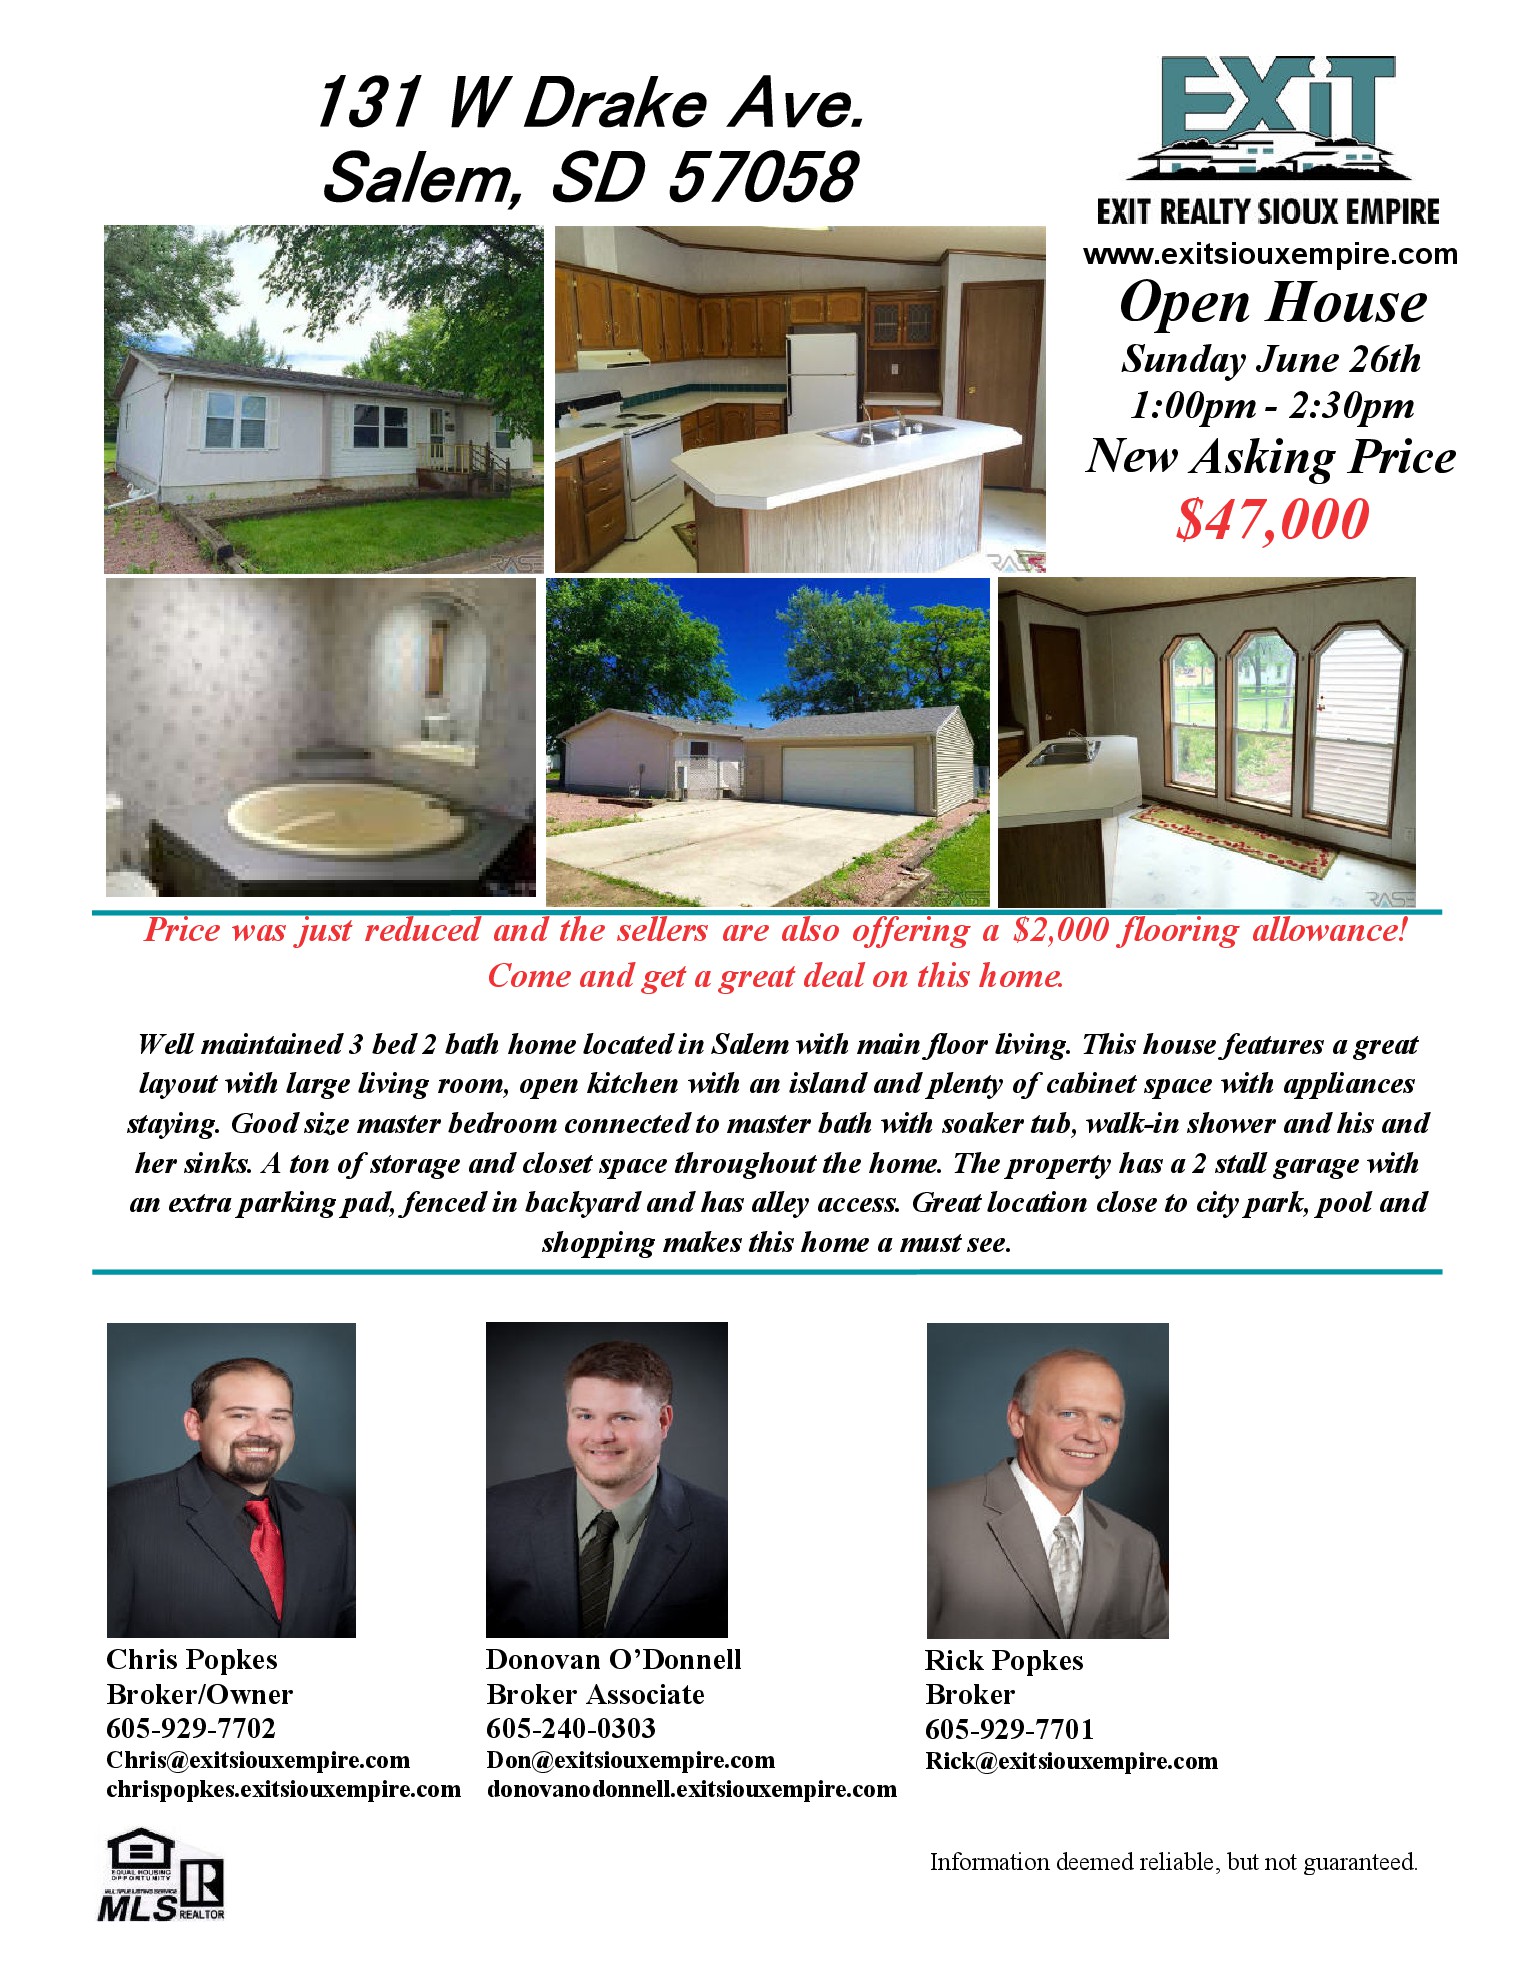 Join Us for Open House This Sunday June 26th, 2016!